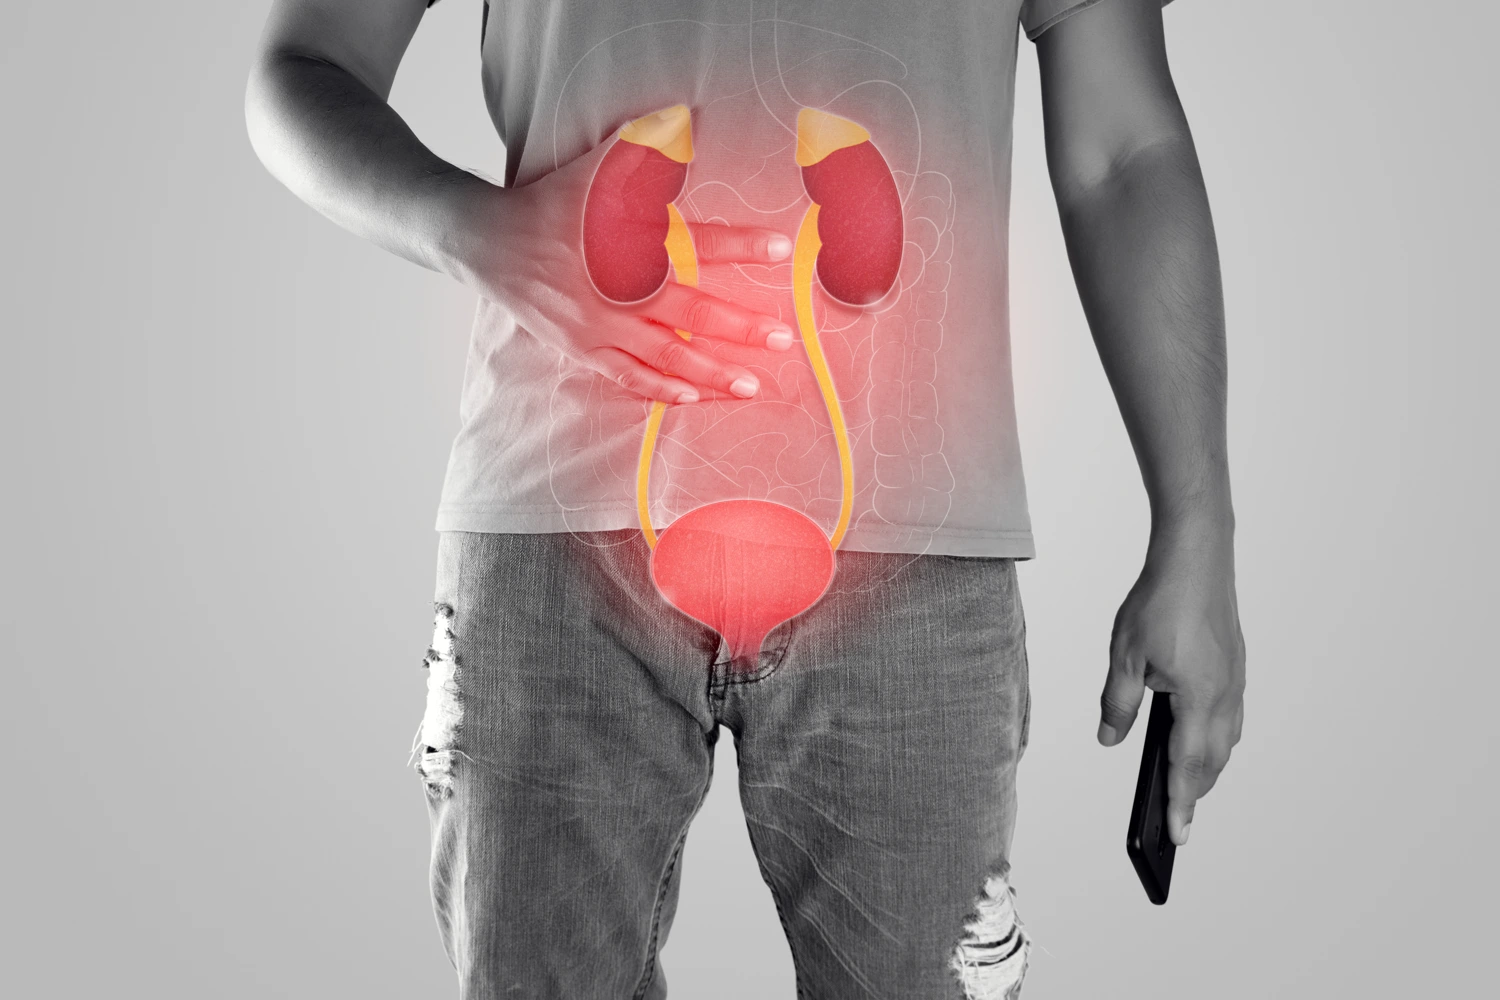 Man experiencing pain in his kidney area which may indicate kidney issues or disease.